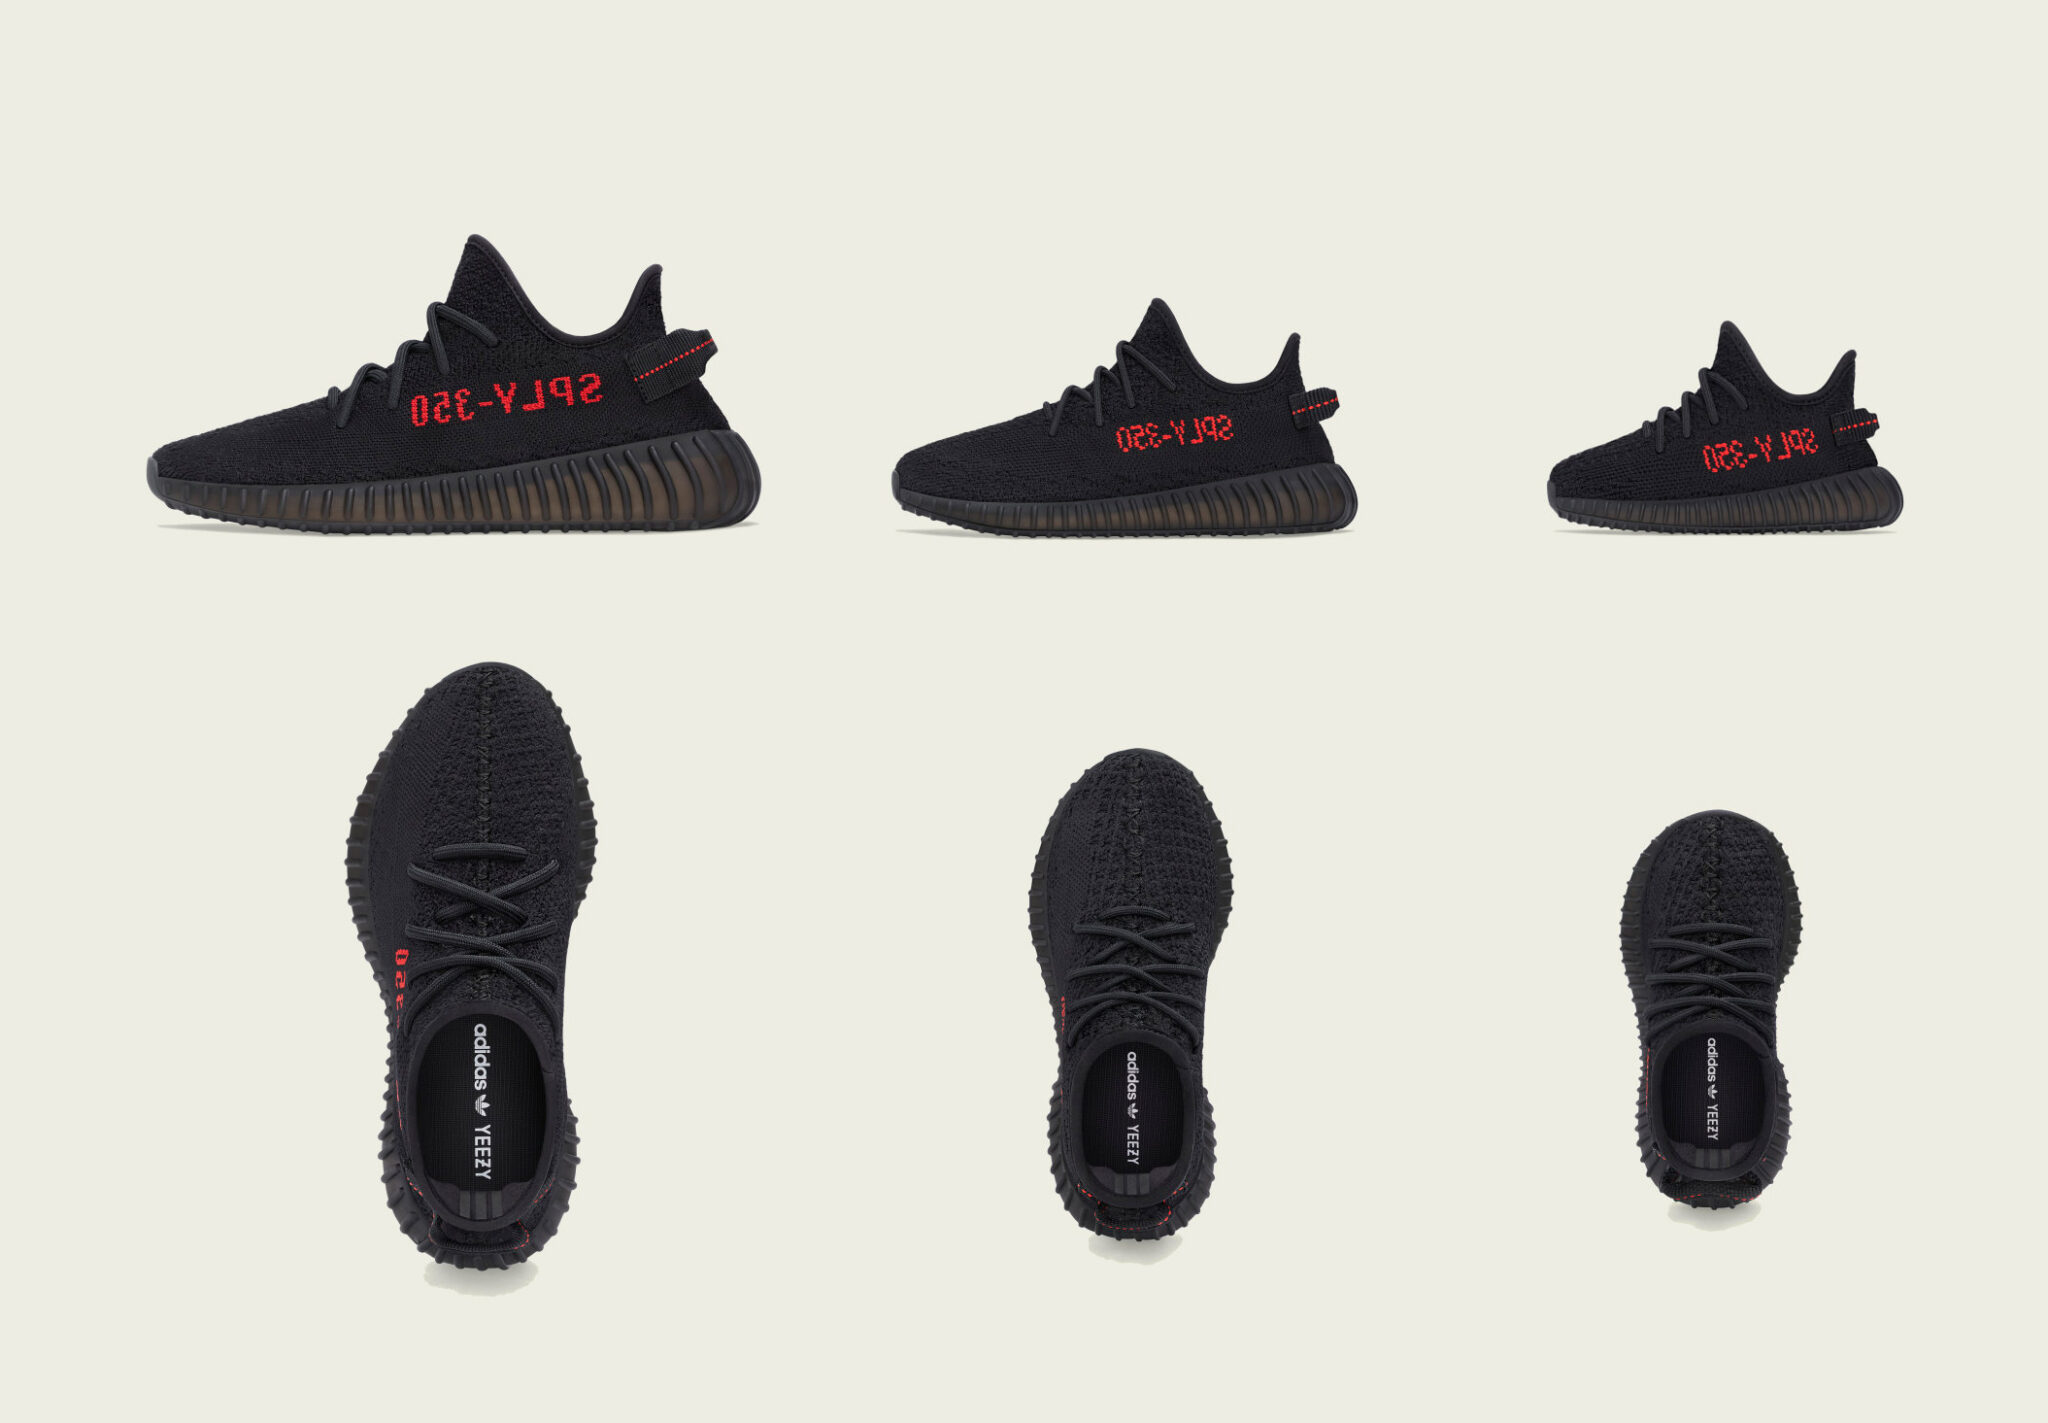 adidas YEEZY BOOST 350 V2 – Black / Red 2020 | sneakerb0b RELEASES